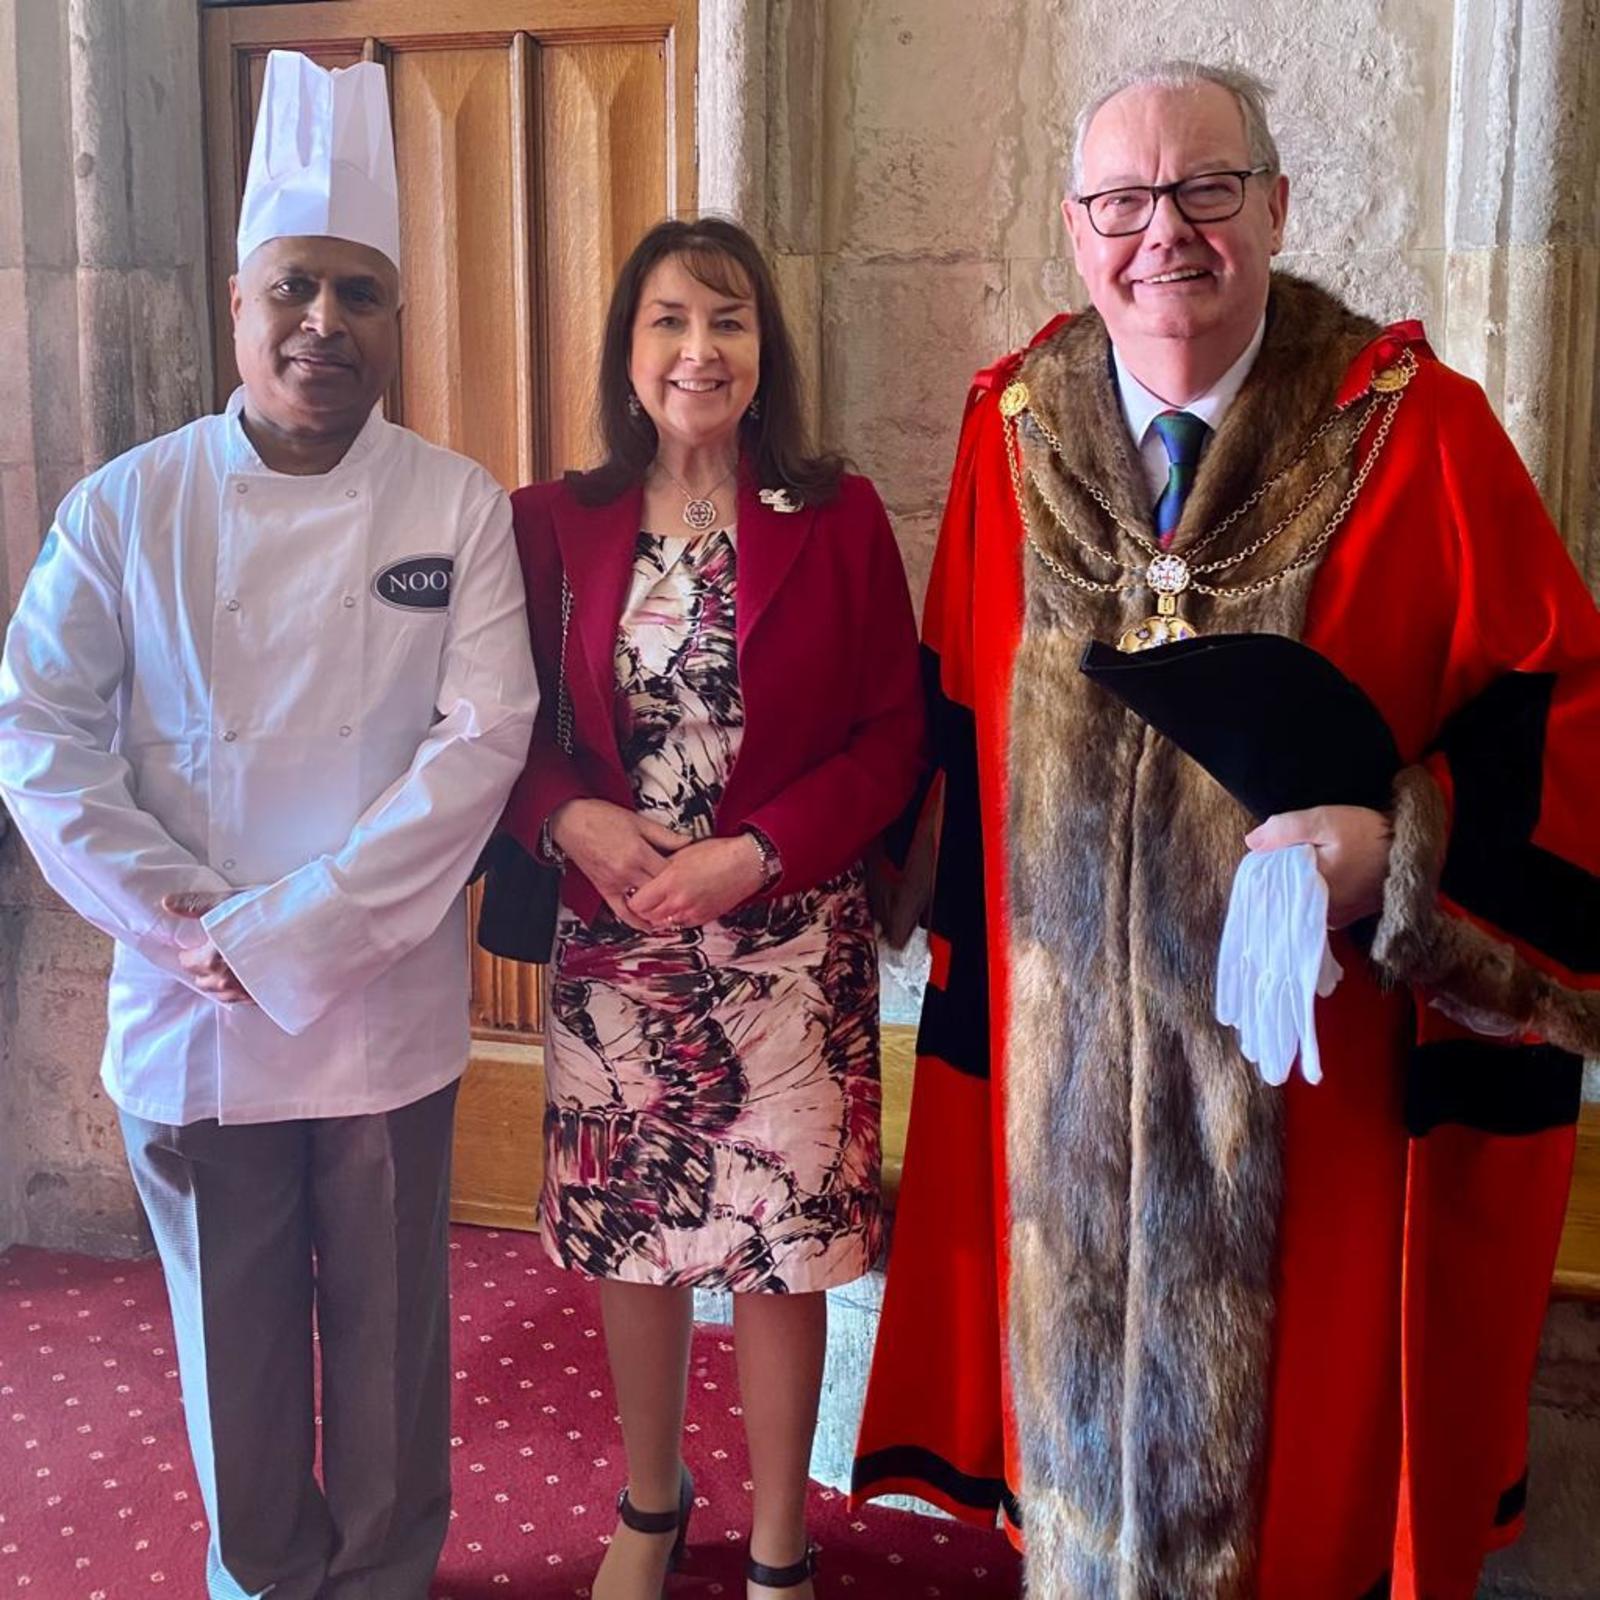 30 Mar 23 - The Lord Mayor's Big Curry Lunch, with massive support from the City’s Livery Companies, over 1600 people were treated to an excellent curry lunch prepared as usual by Head Chef of Noon Foods, Mr Rao